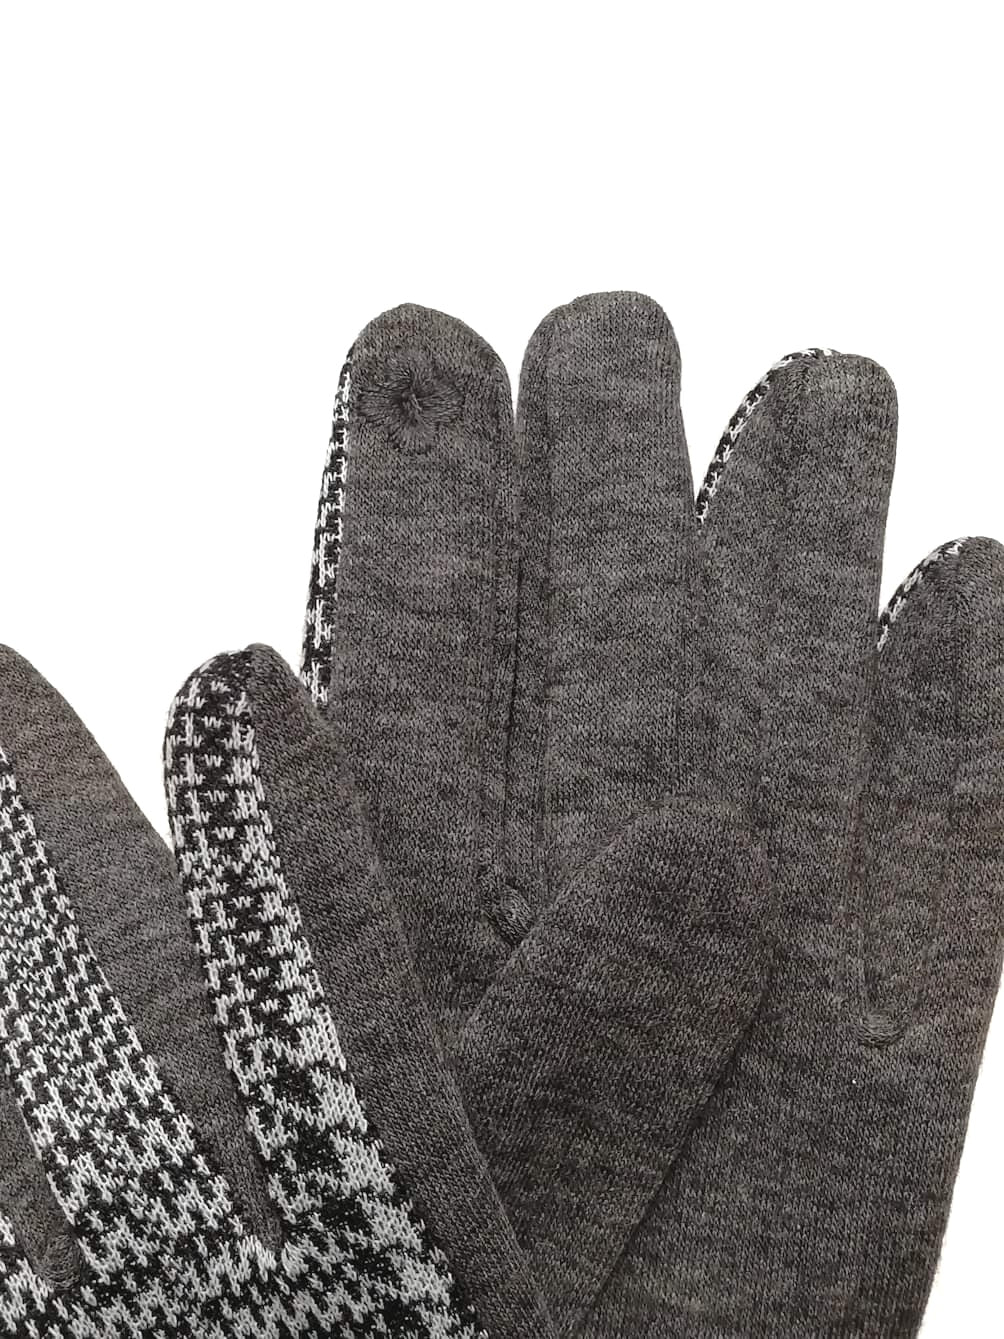 All time classic chic gloves